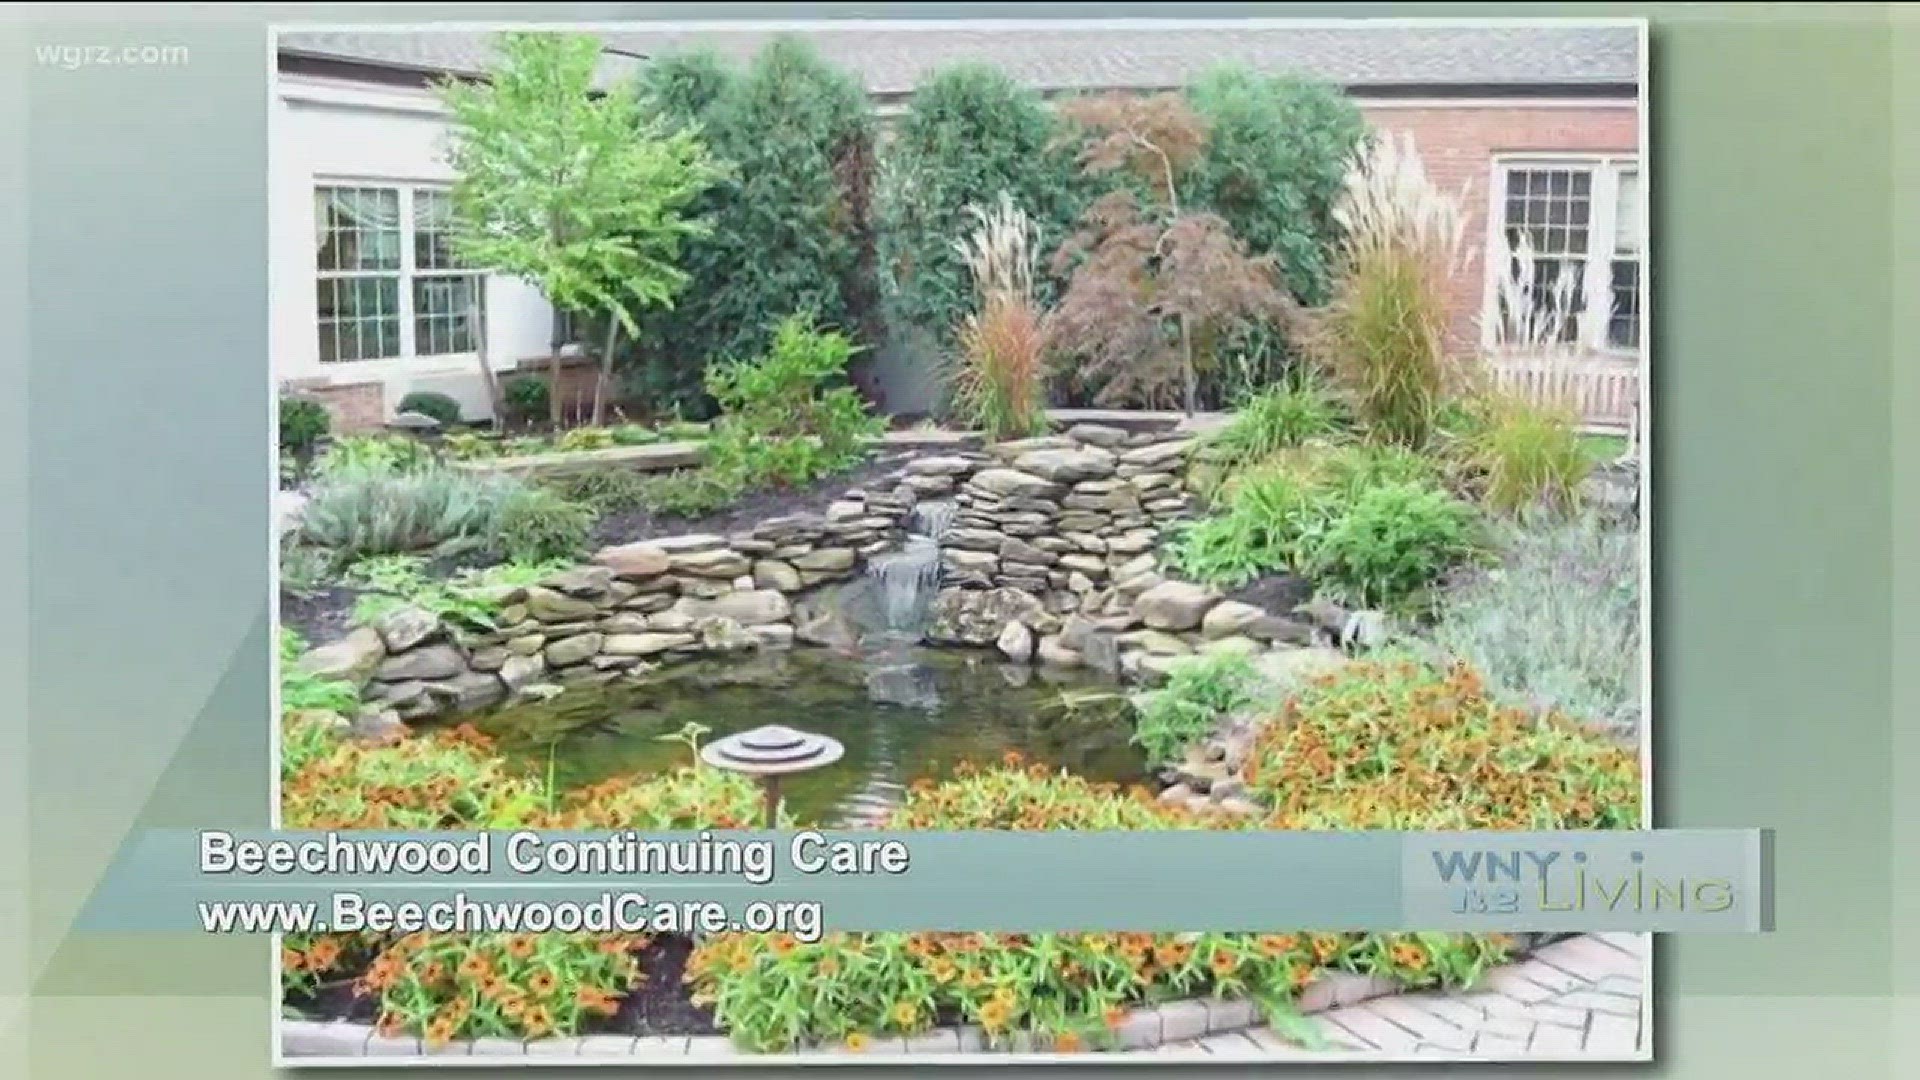 WNY Living - March 24 - Beechwood Continuing Care